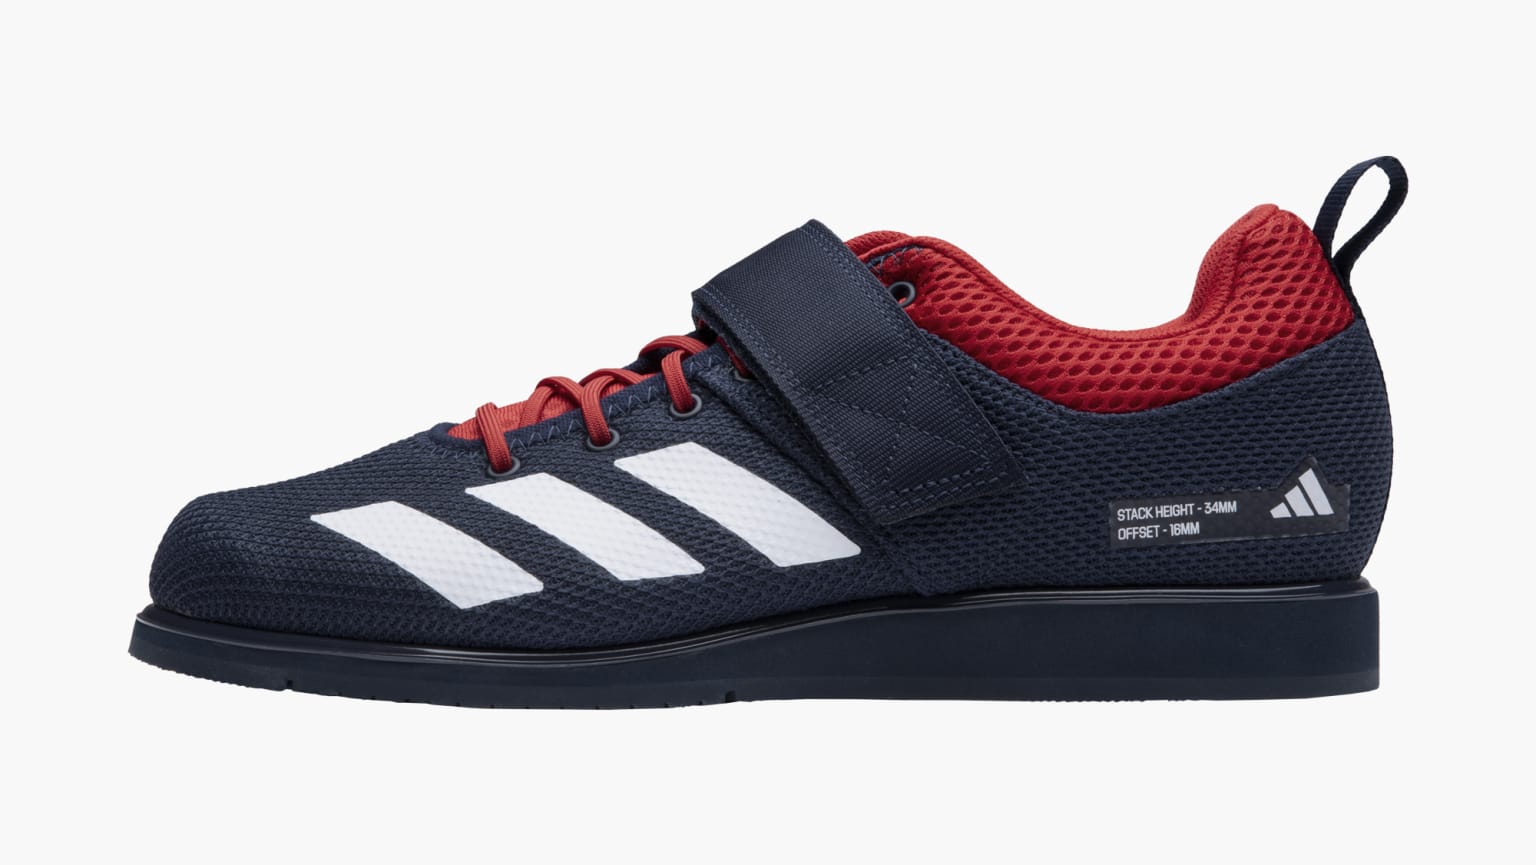 elite Psychiatry nickel Adidas Powerlift 5 Weightlifting Shoes - Team Navy Blue 2 / FTWR White /  Better Scarlet | Rogue Fitness